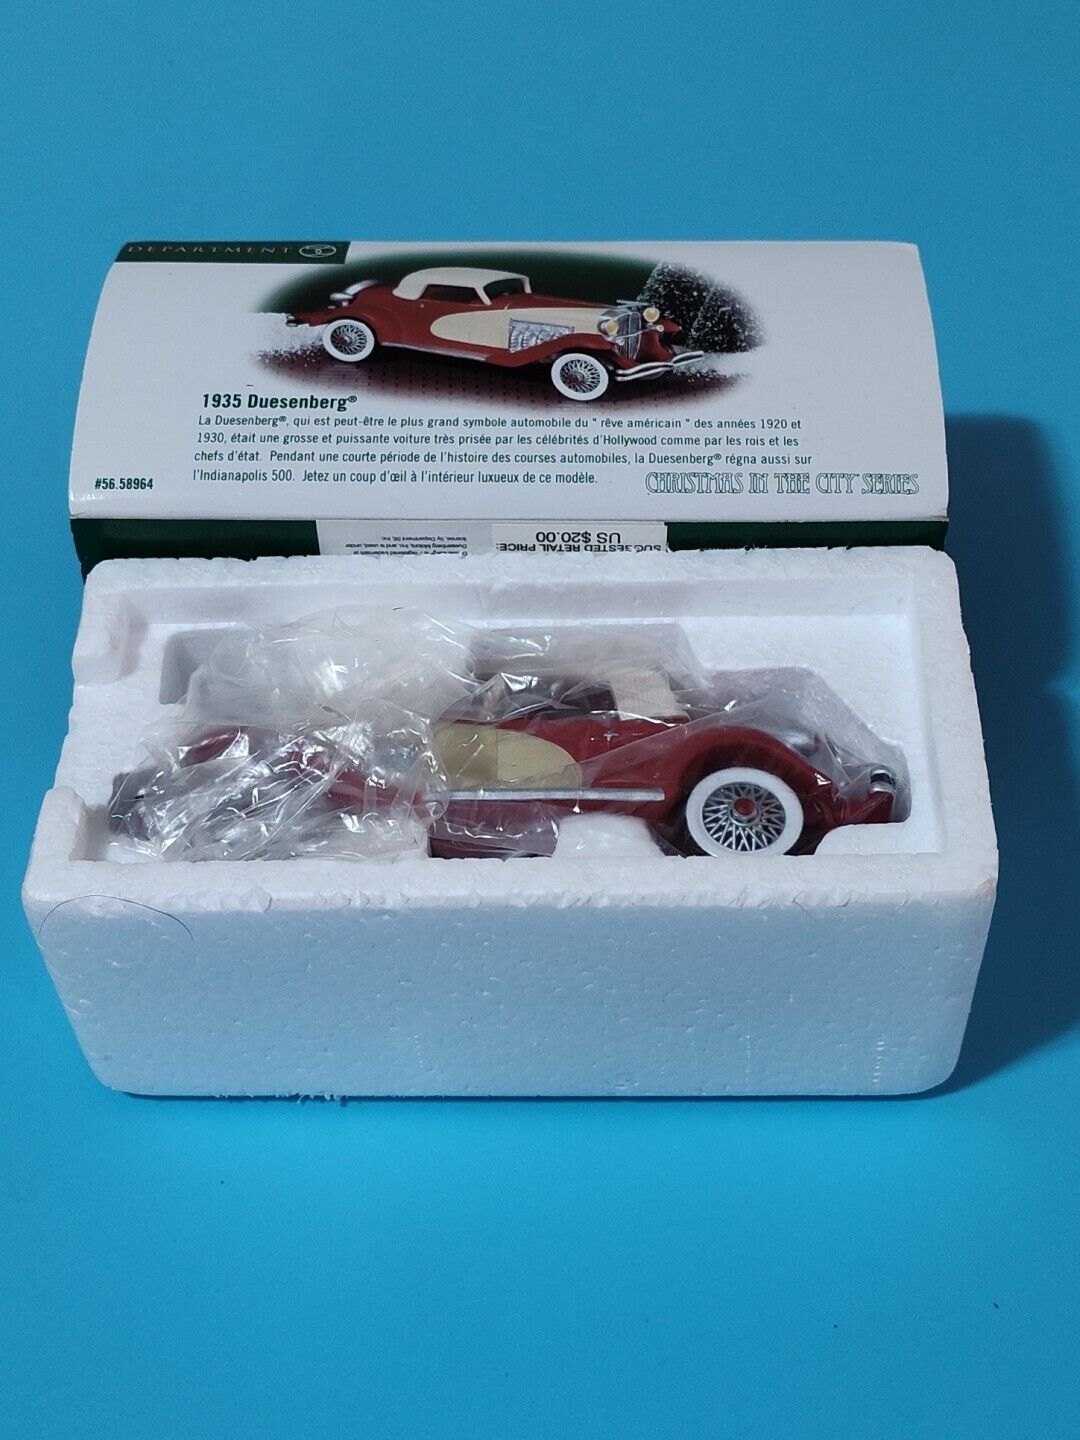 Department 56 Christmas In The City Series 1935 Red Duesenberg 58964 B31